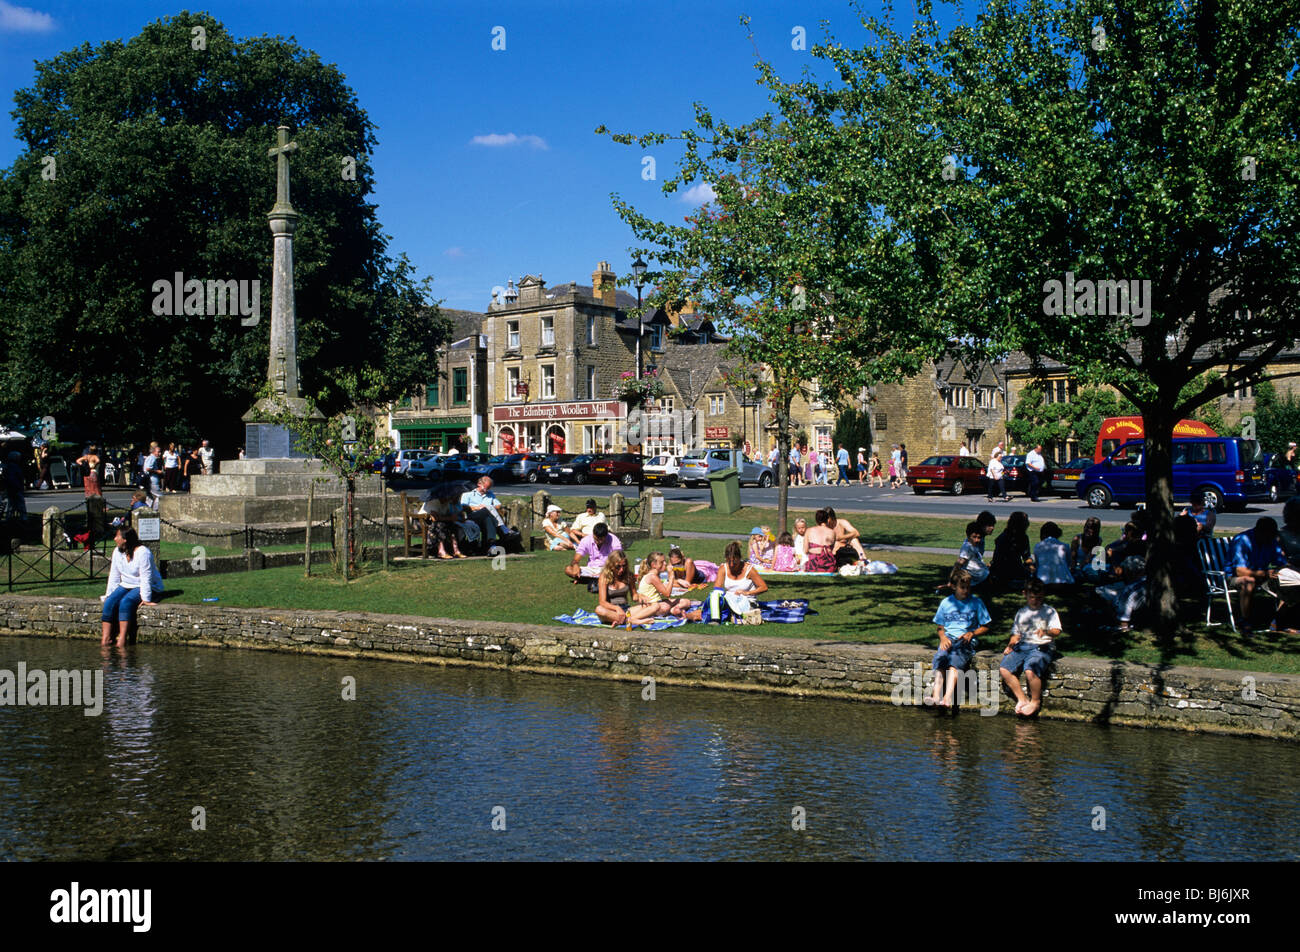 Bank holiday weekend at Cotswold village of Bourton on the Water Stock Photo